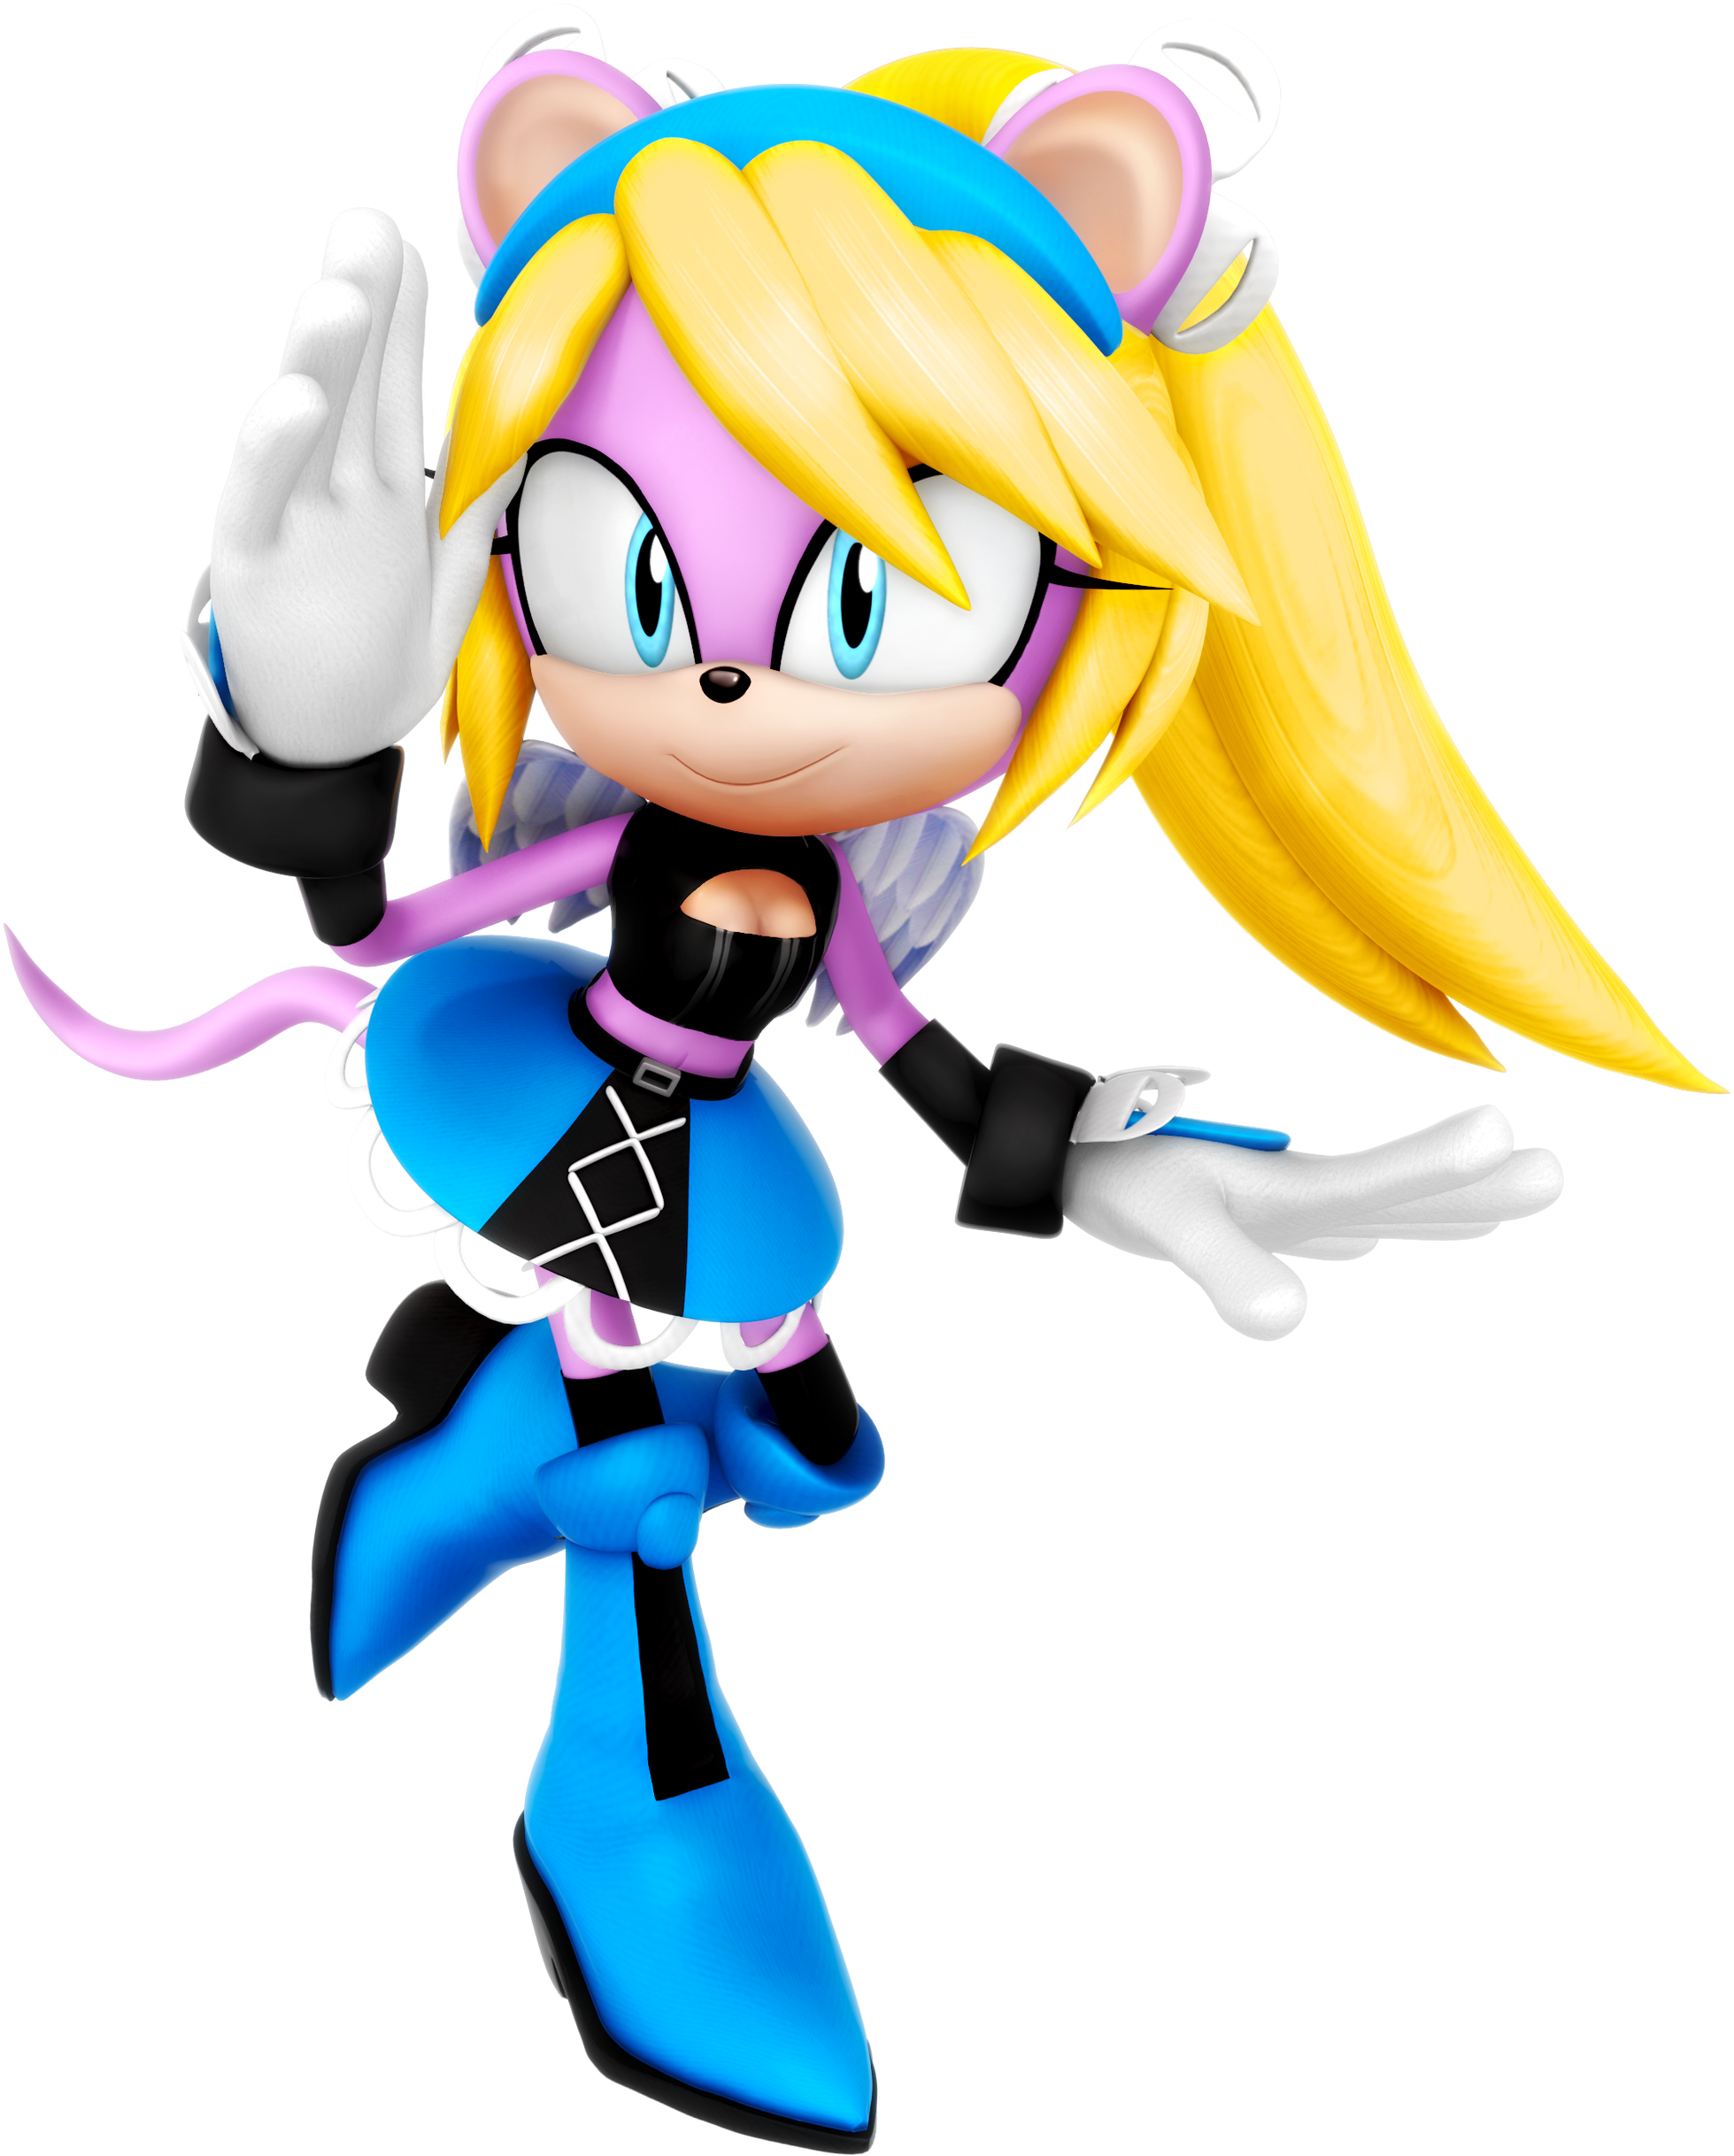 Candace Aka Candy The Mongoose Render By Nibroc-rock - Candace Aka Candy The Mongoose Render By Nibroc-rock (2449x2449)